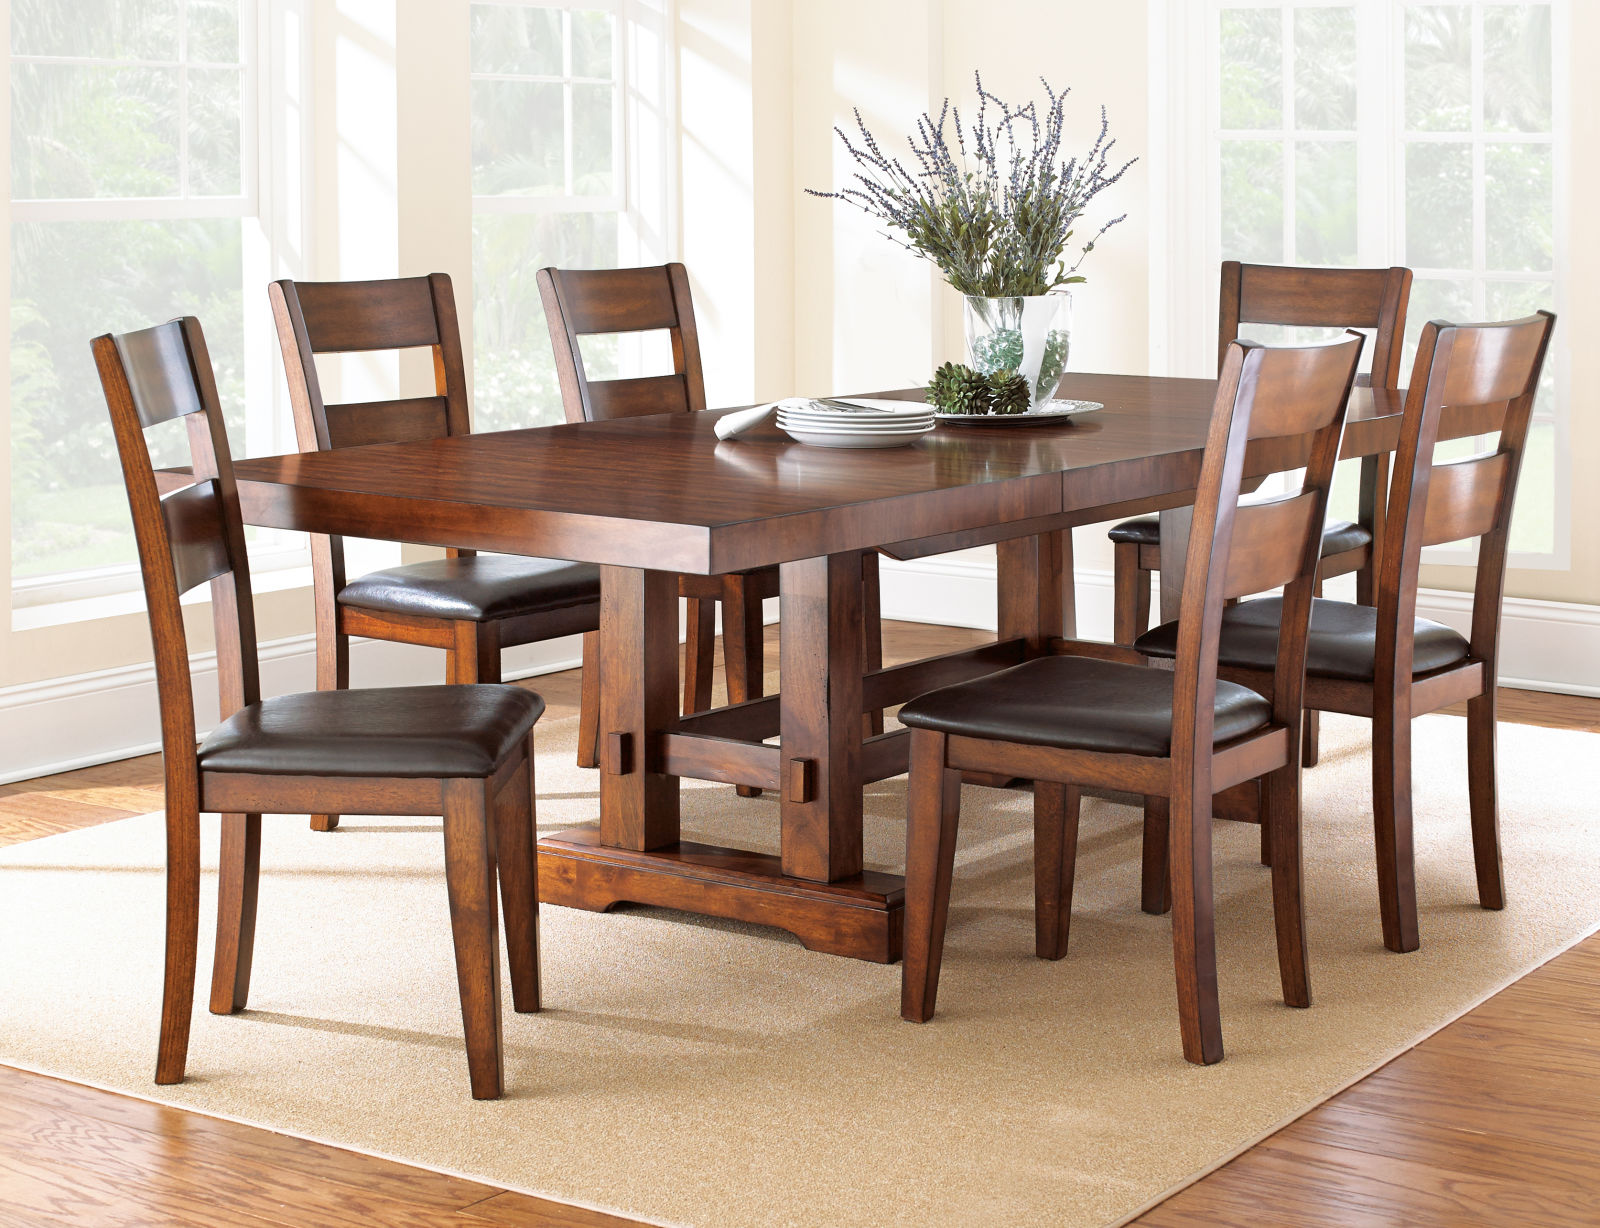 Wholesale discount factory direct dining room furniture Indianapolis Indiana.